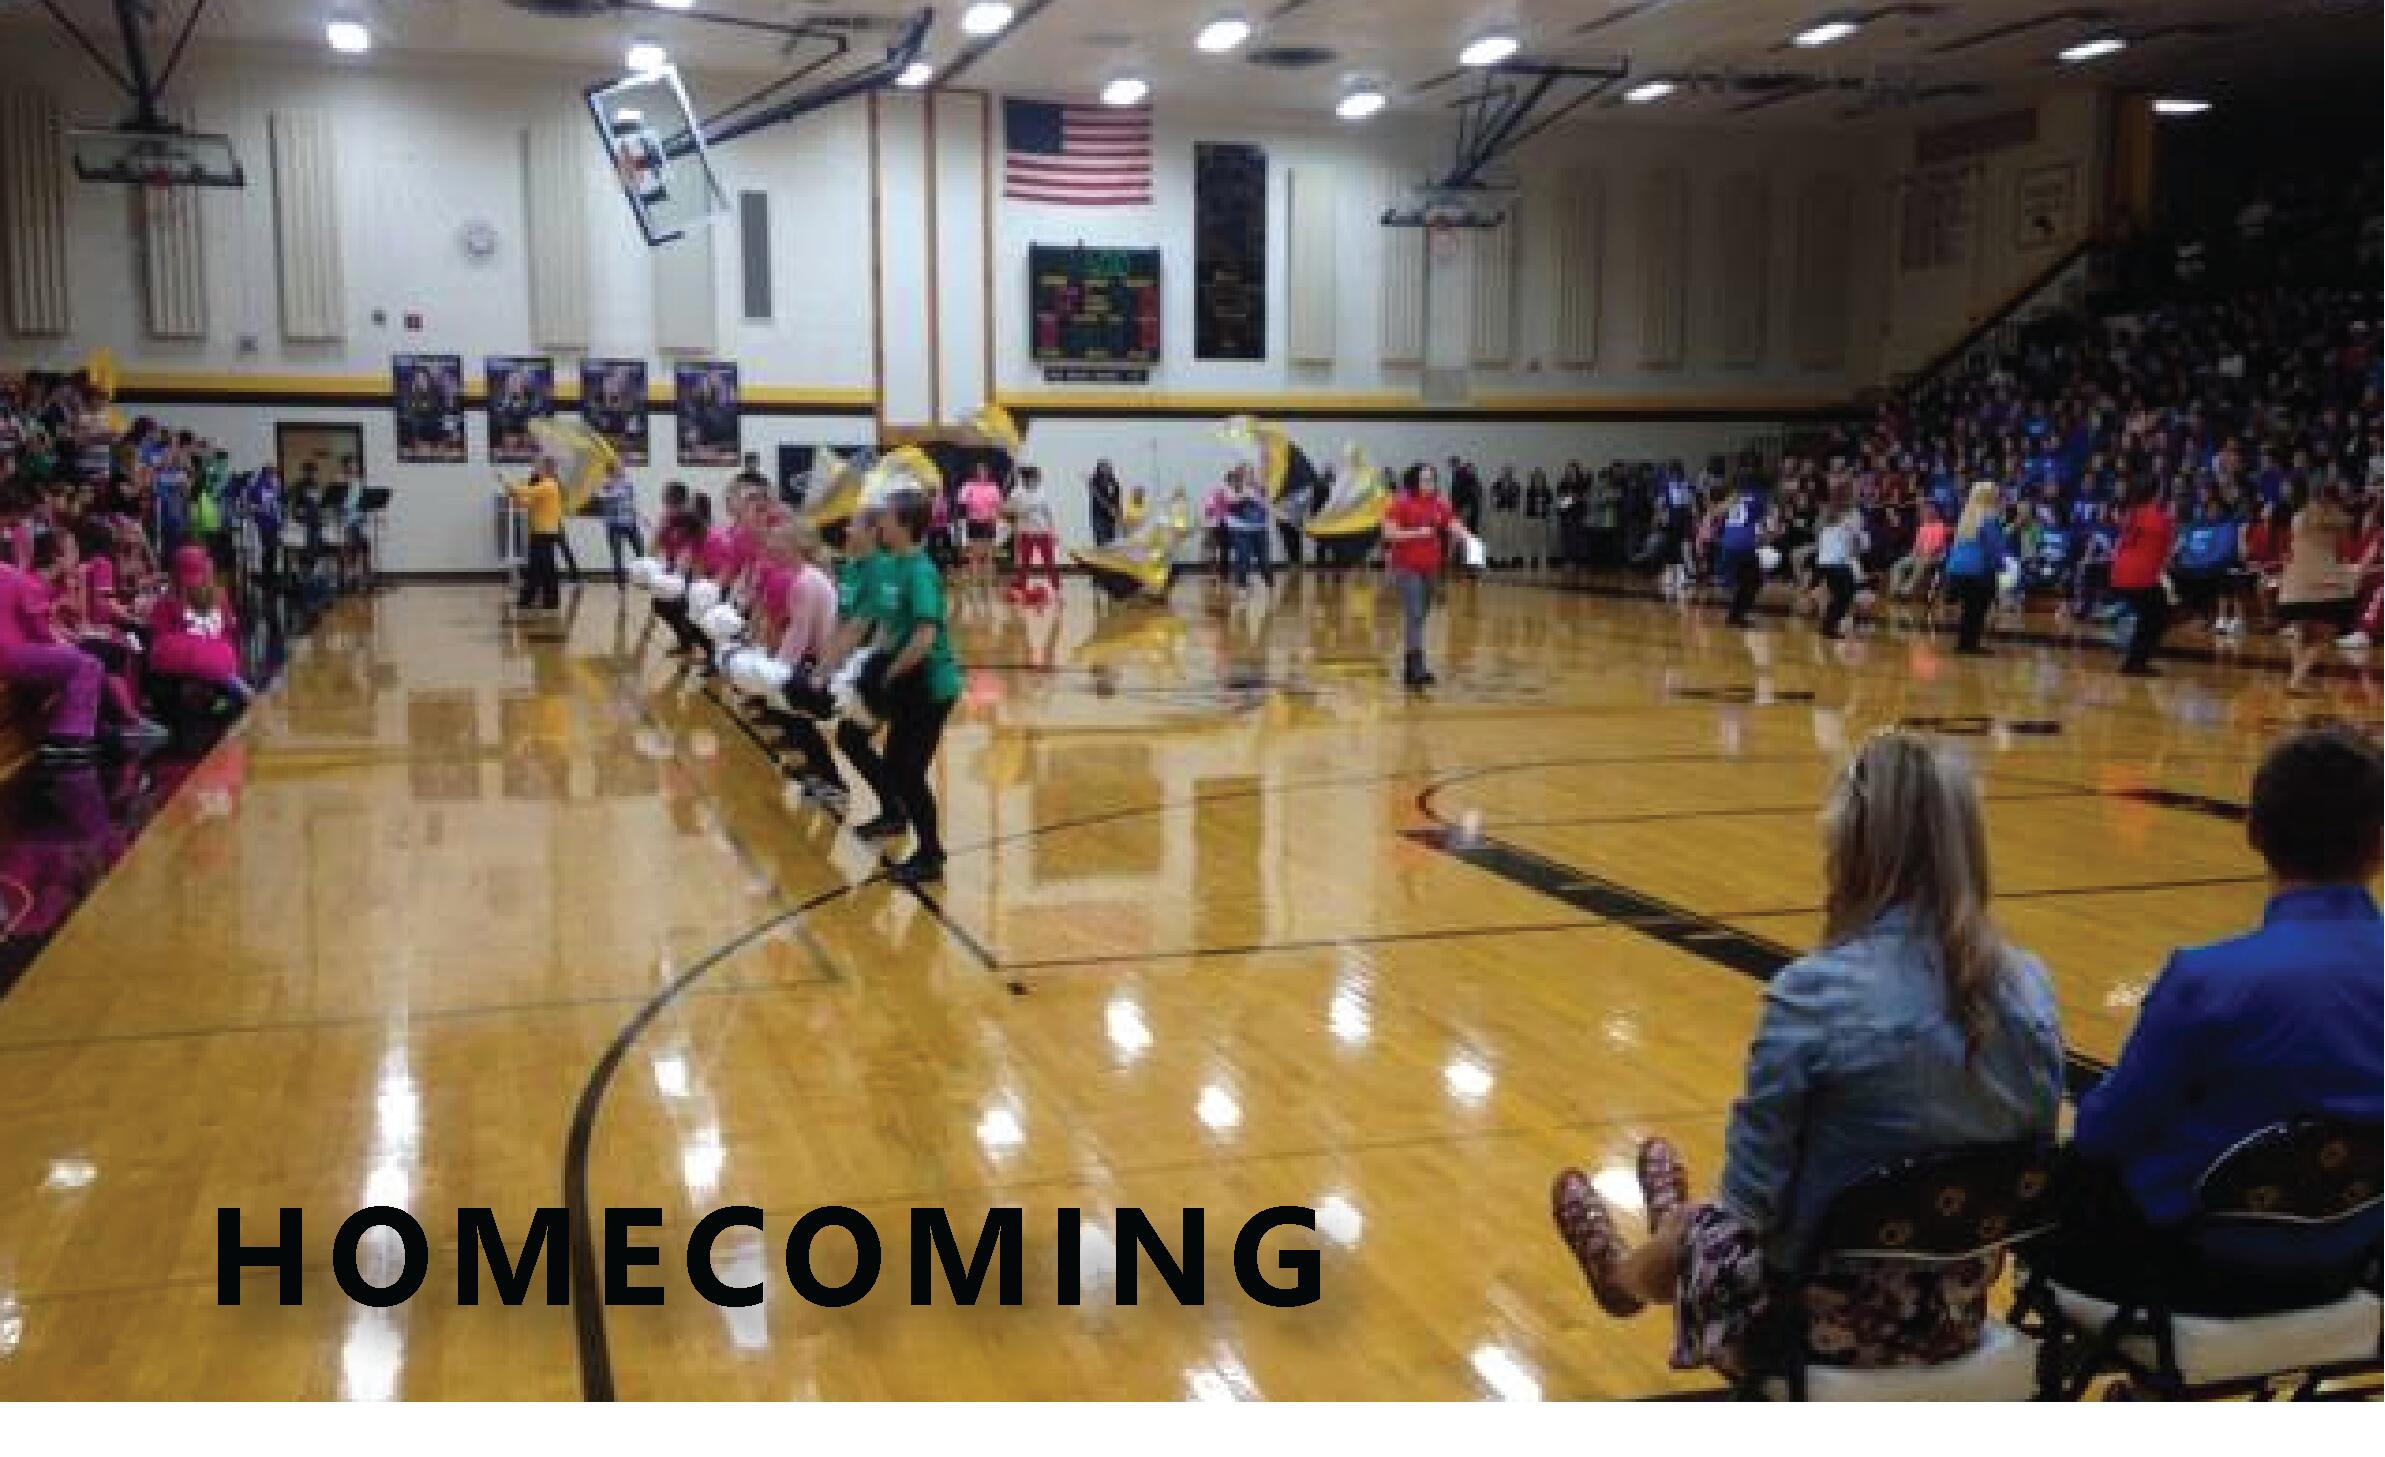 Students at gym for homecoming